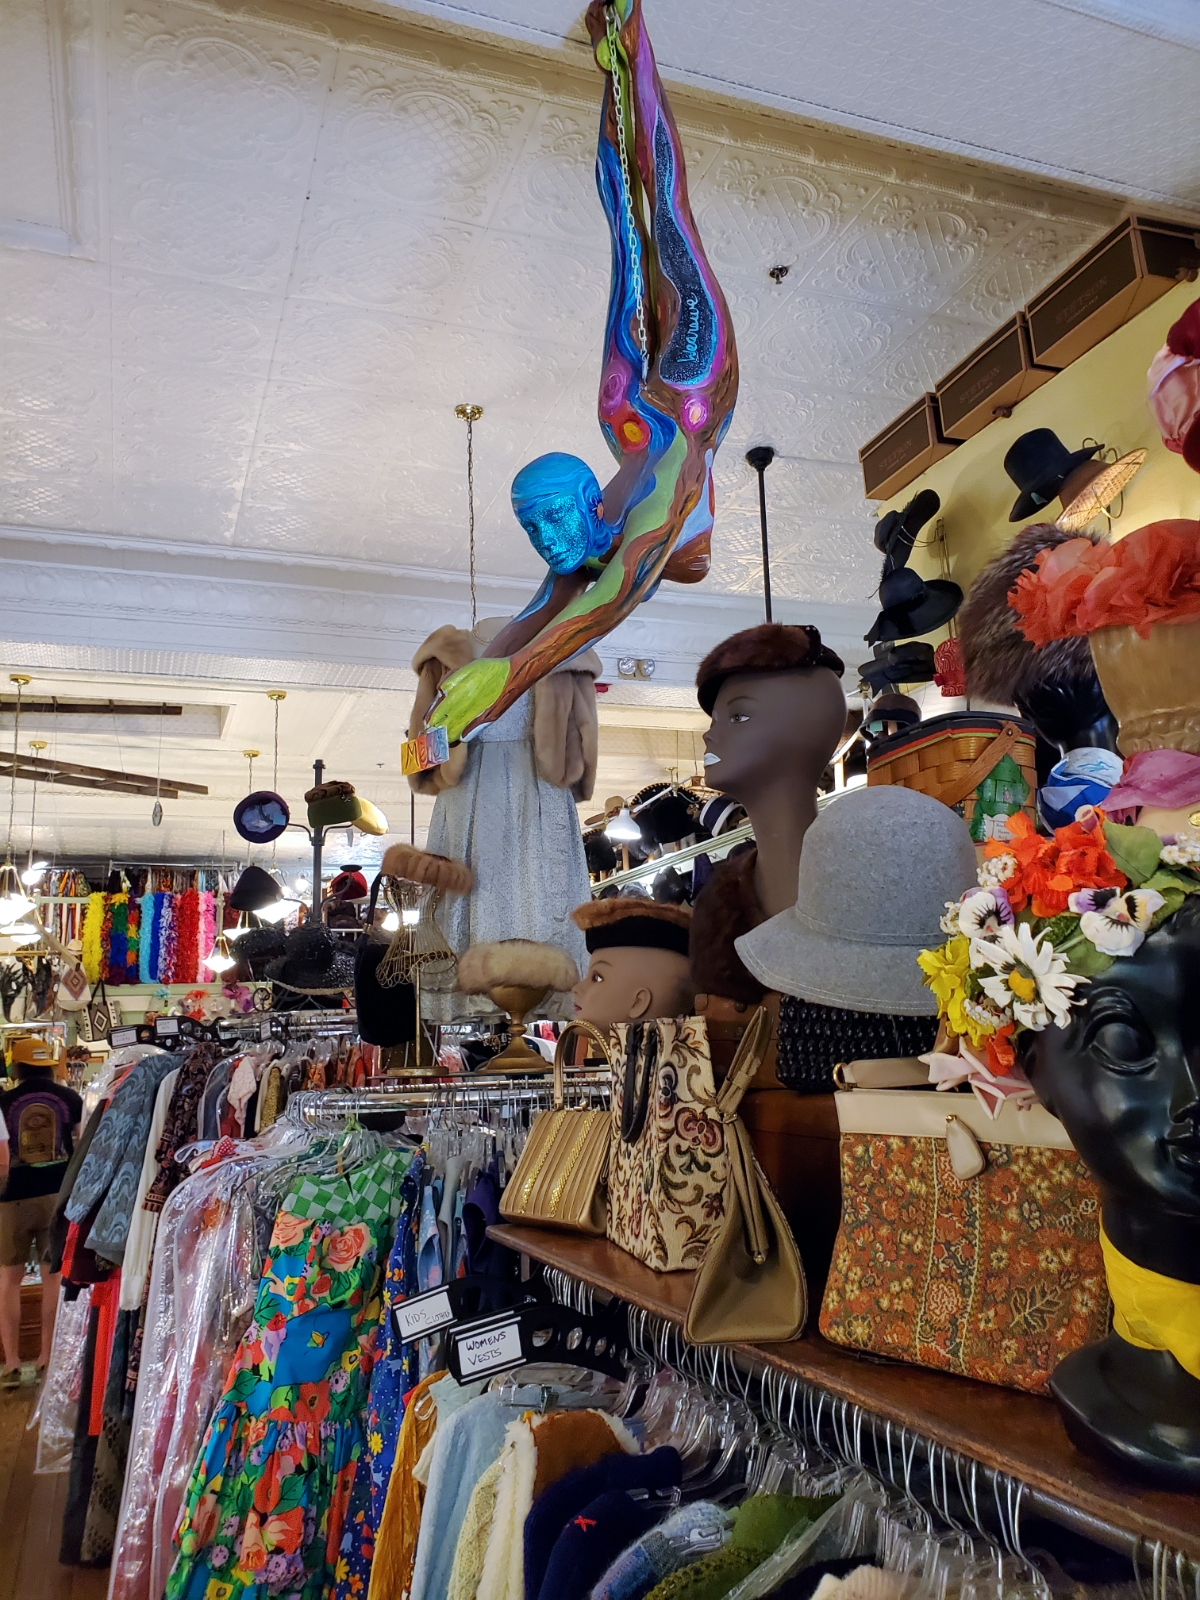 Ybor City La France vintage shop diving mannequin painted in psychedelic patterns and colors